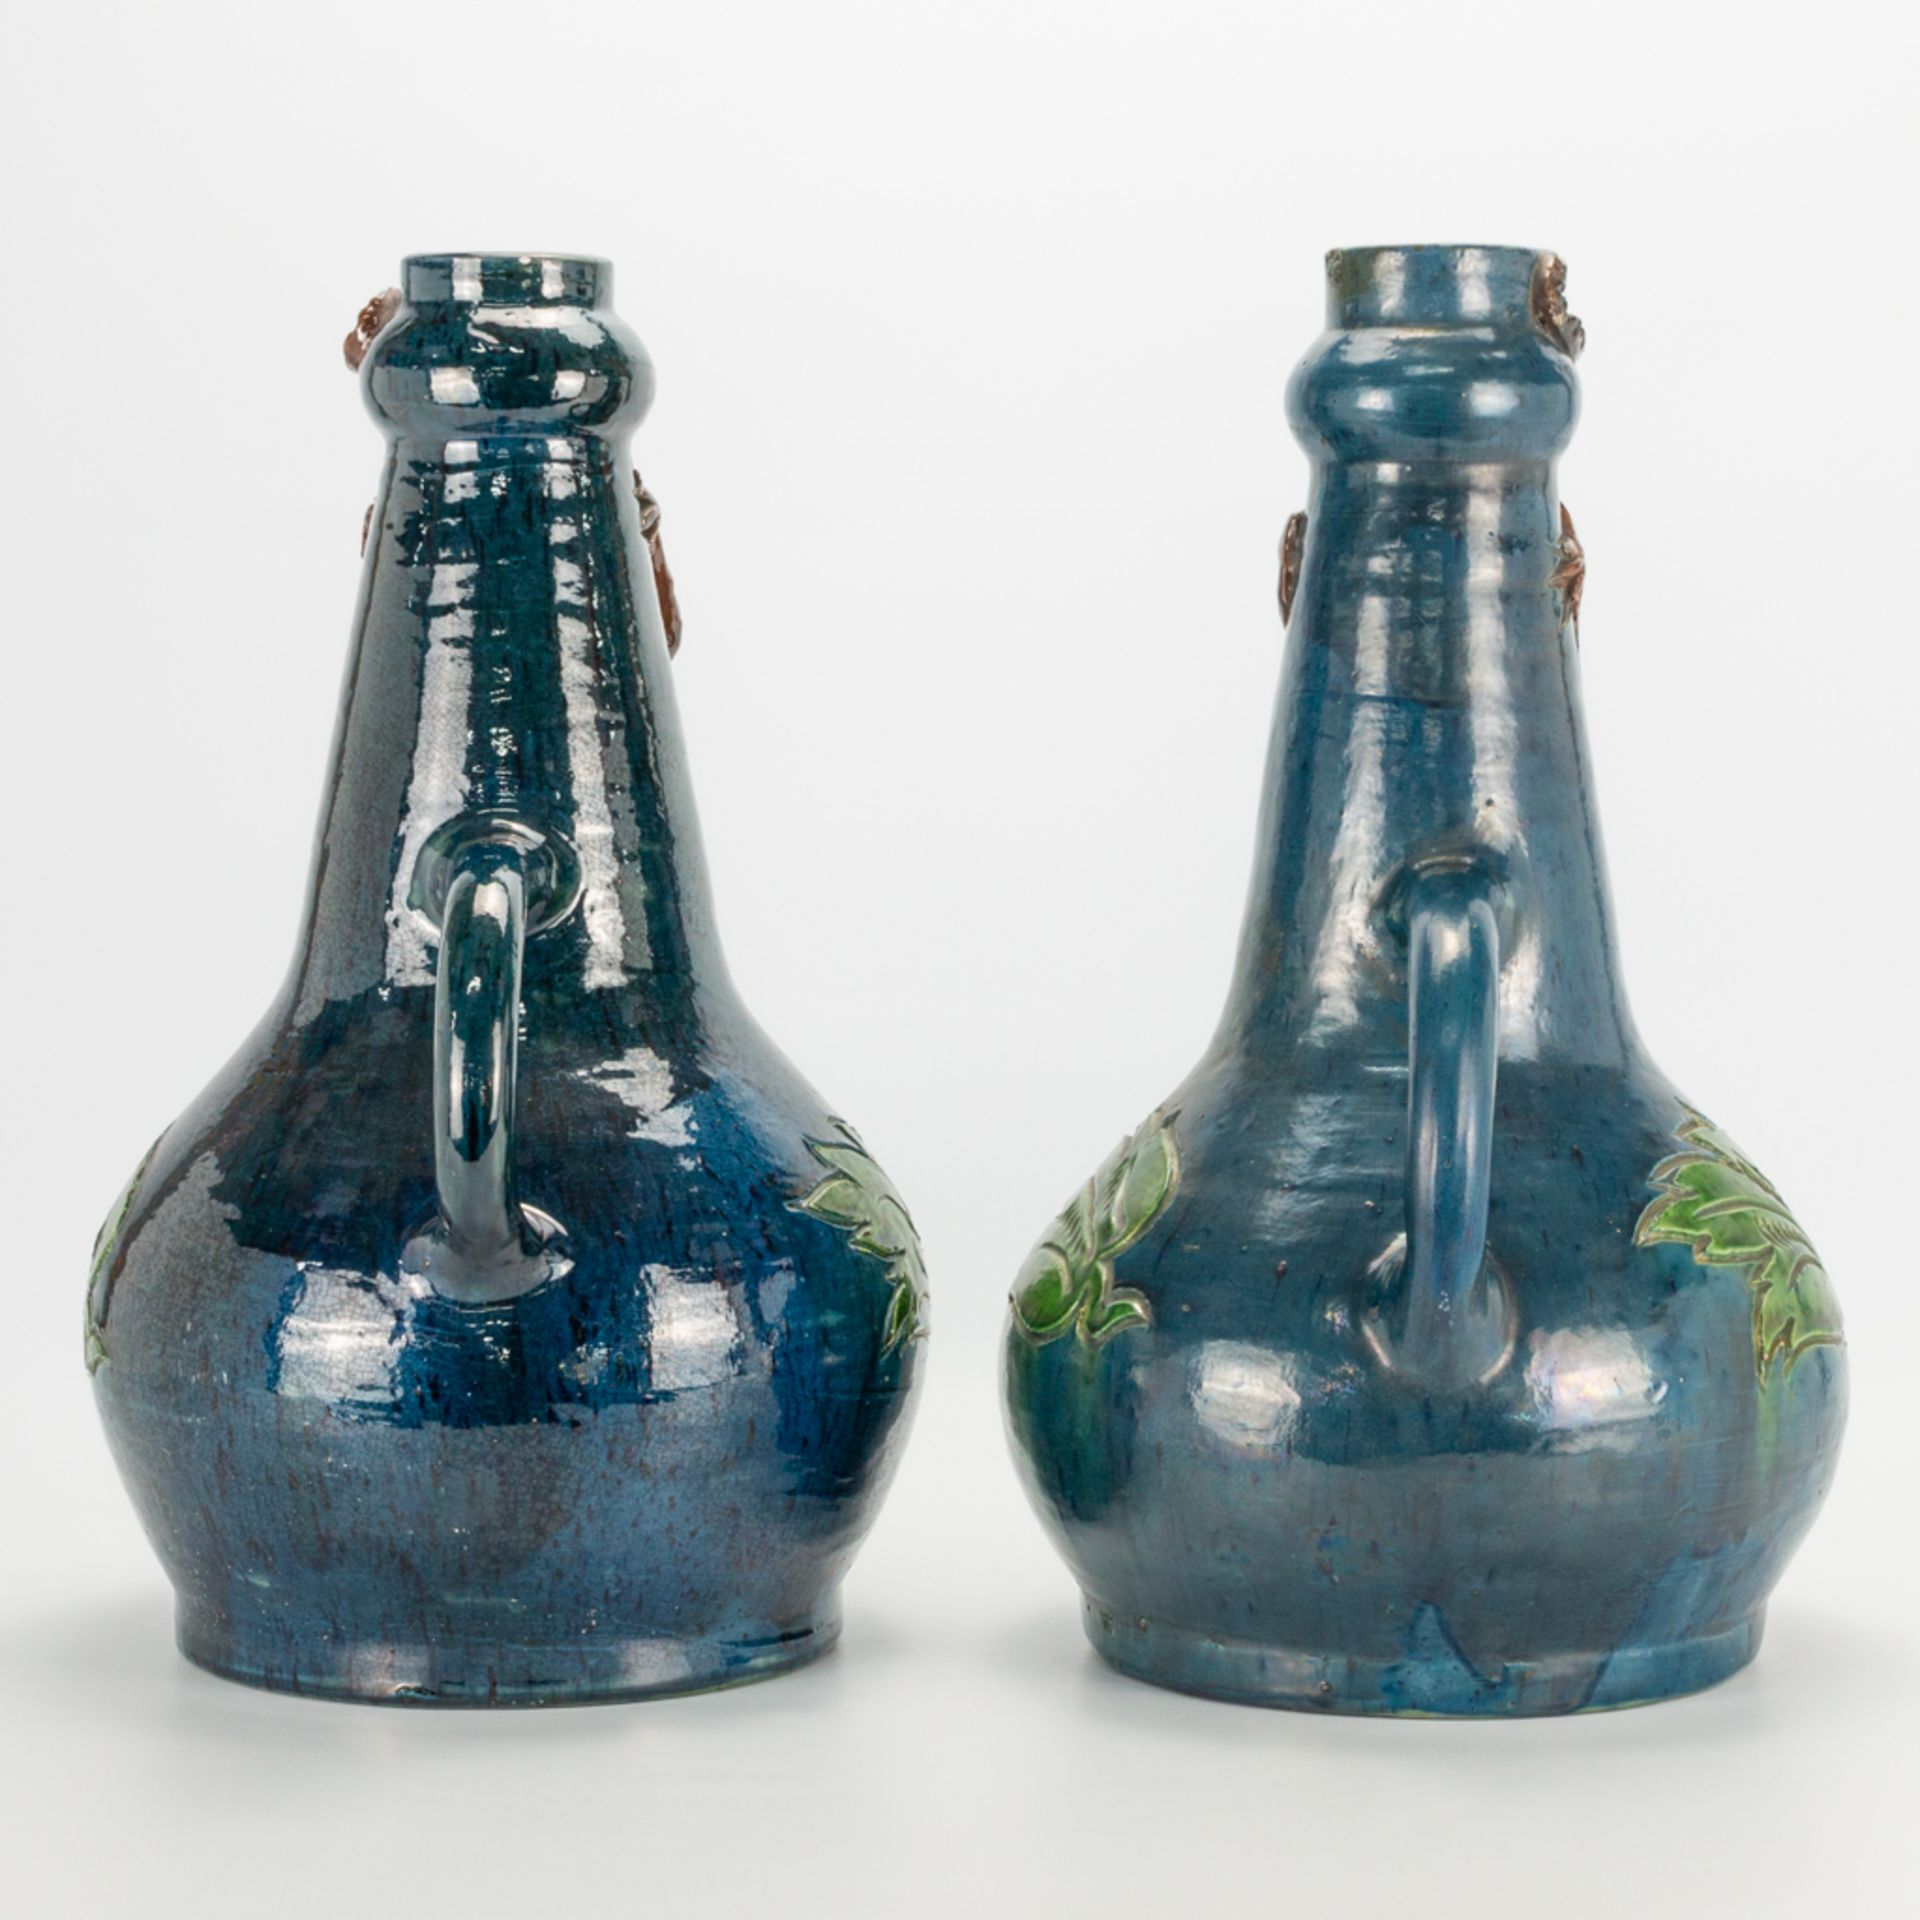 A pair of vases made in Flemish Earthenware with the decor of a salamander. (27 x 30 x 45 cm) - Image 5 of 20